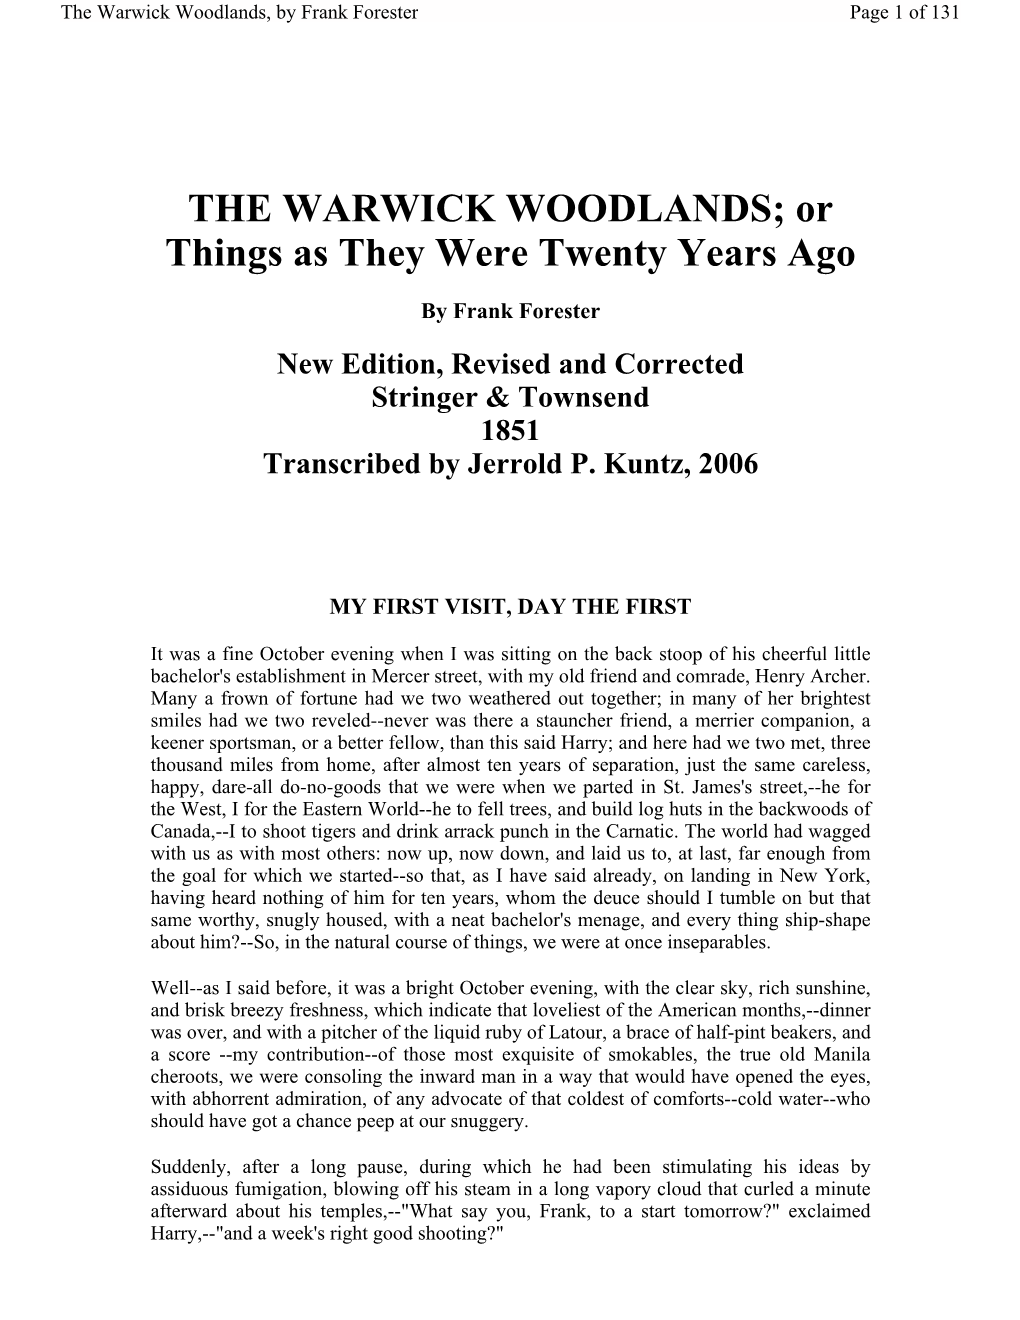 THE WARWICK WOODLANDS; Or Things As They Were Twenty Years Ago